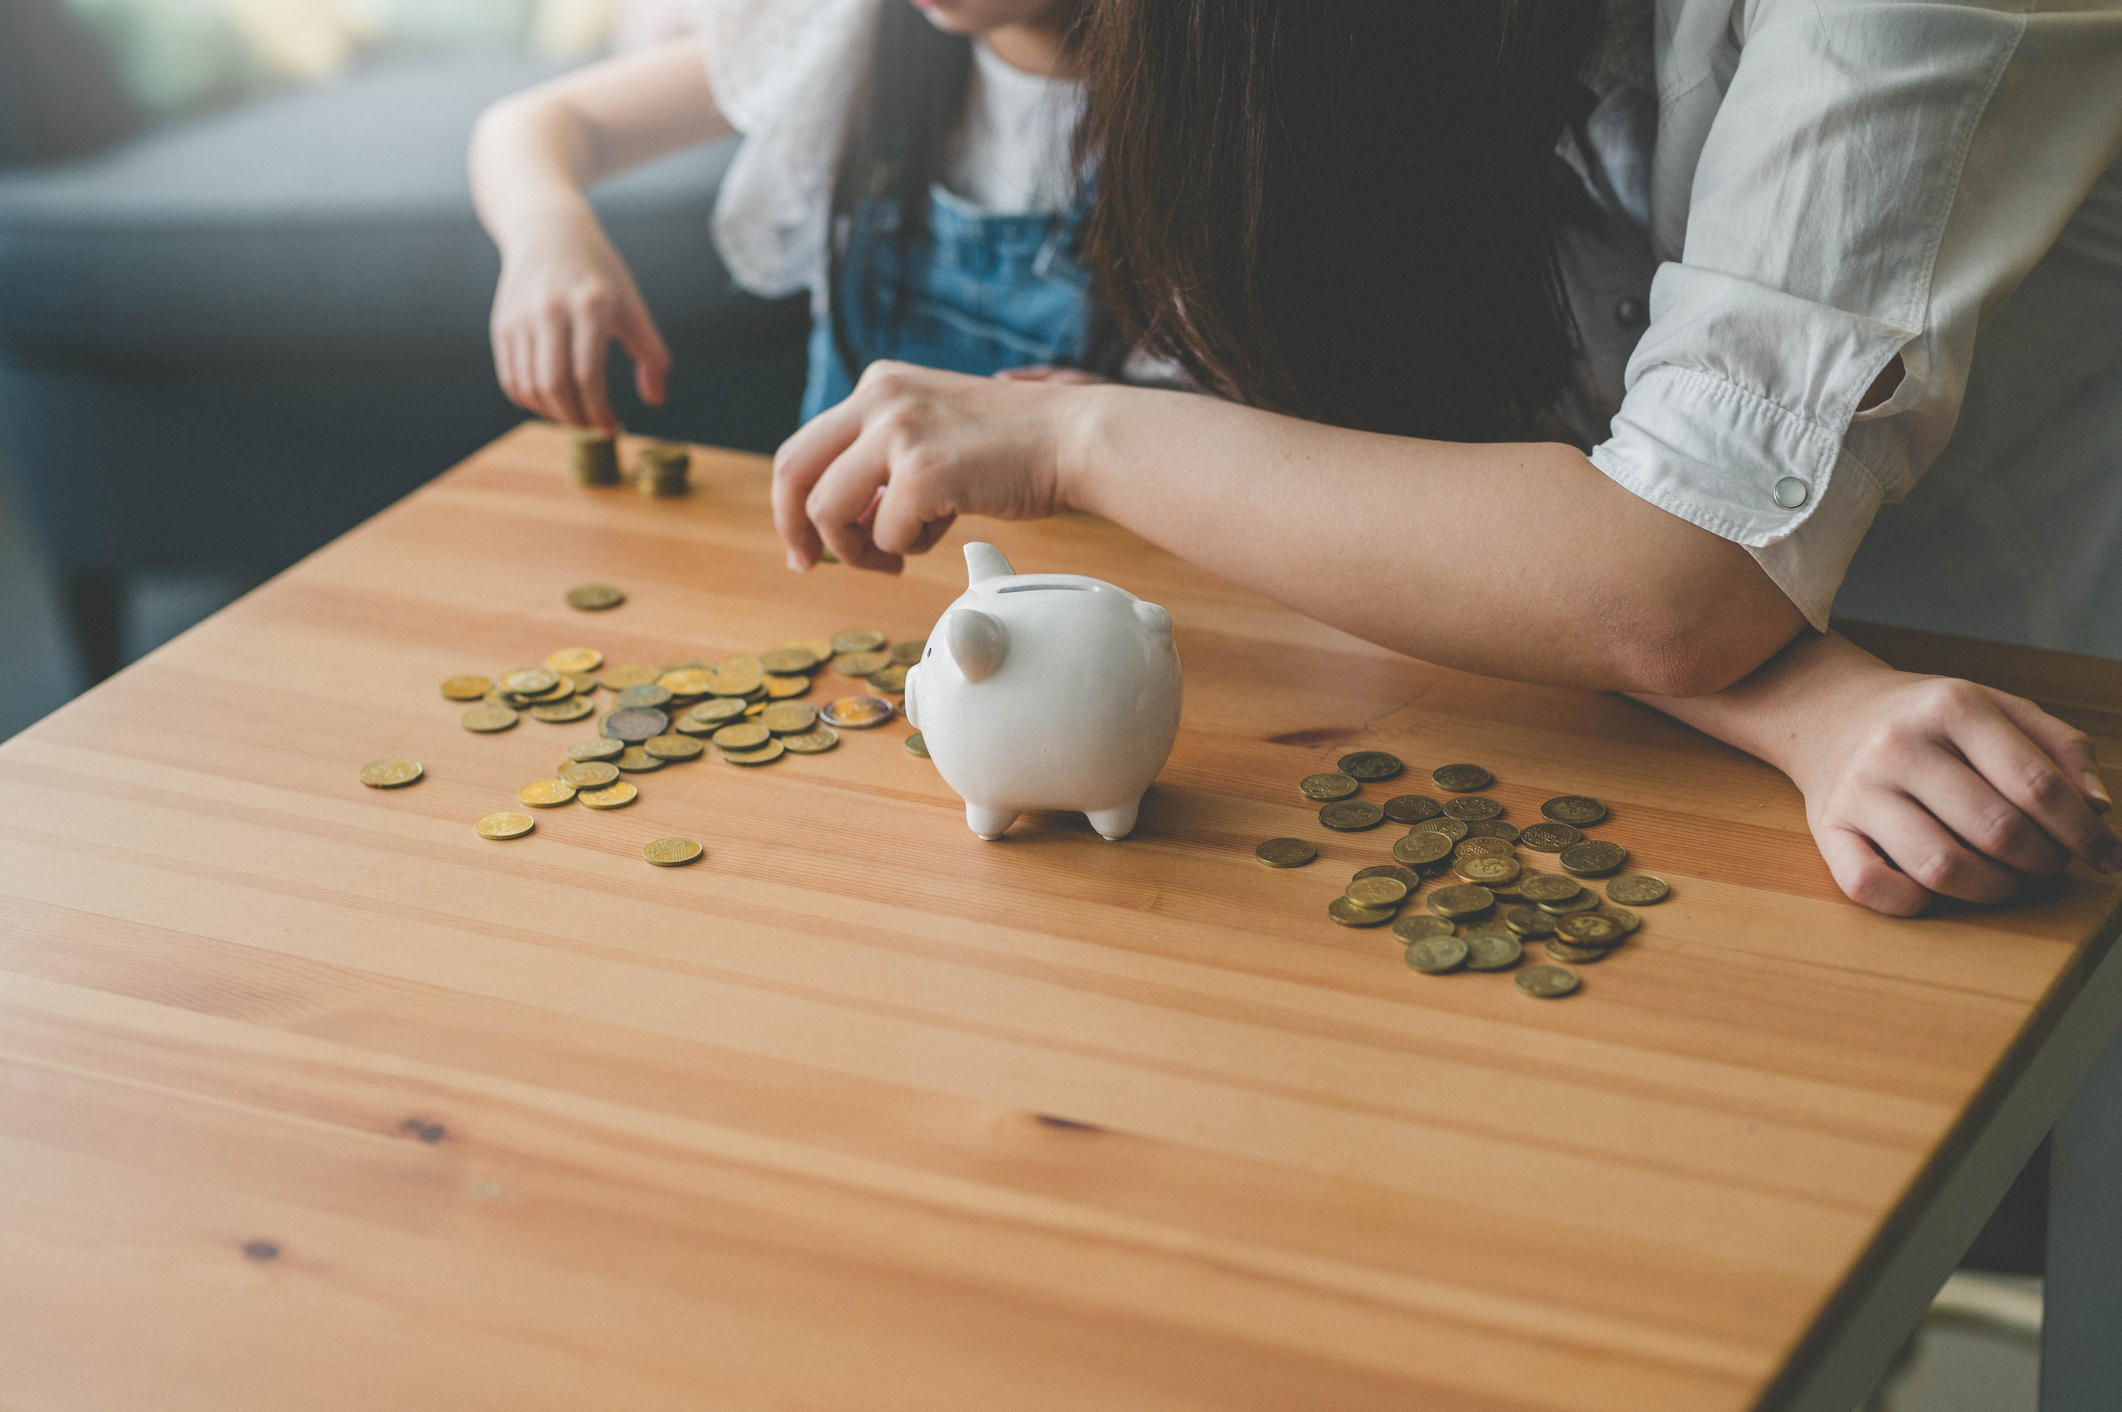 Adult and child counting coins next to a piggy bank, implying financial education